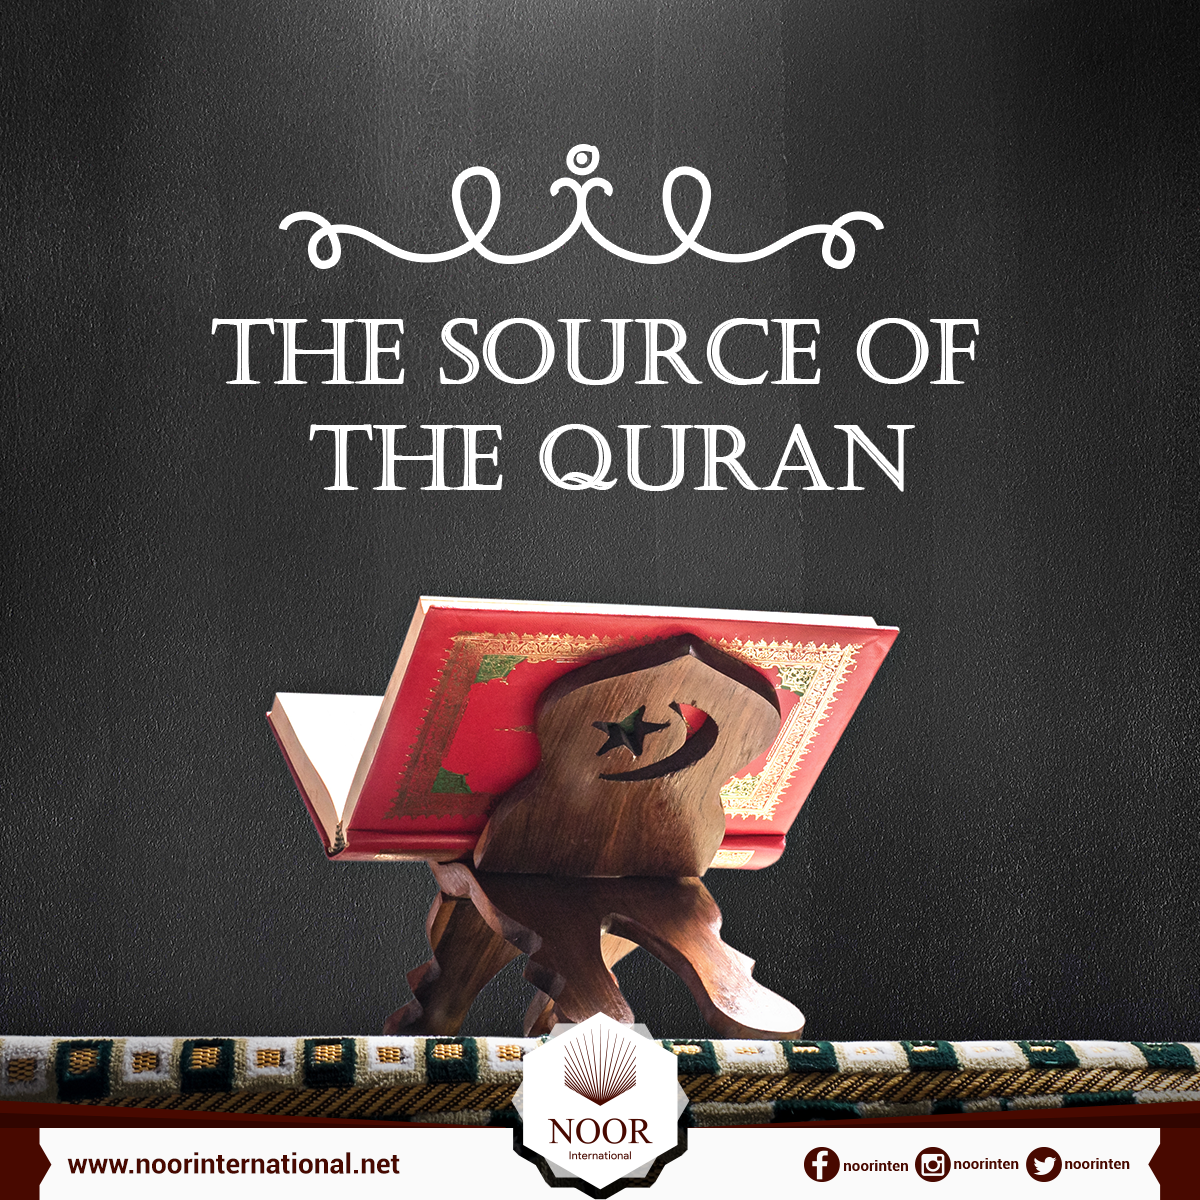 The Source of the Quran